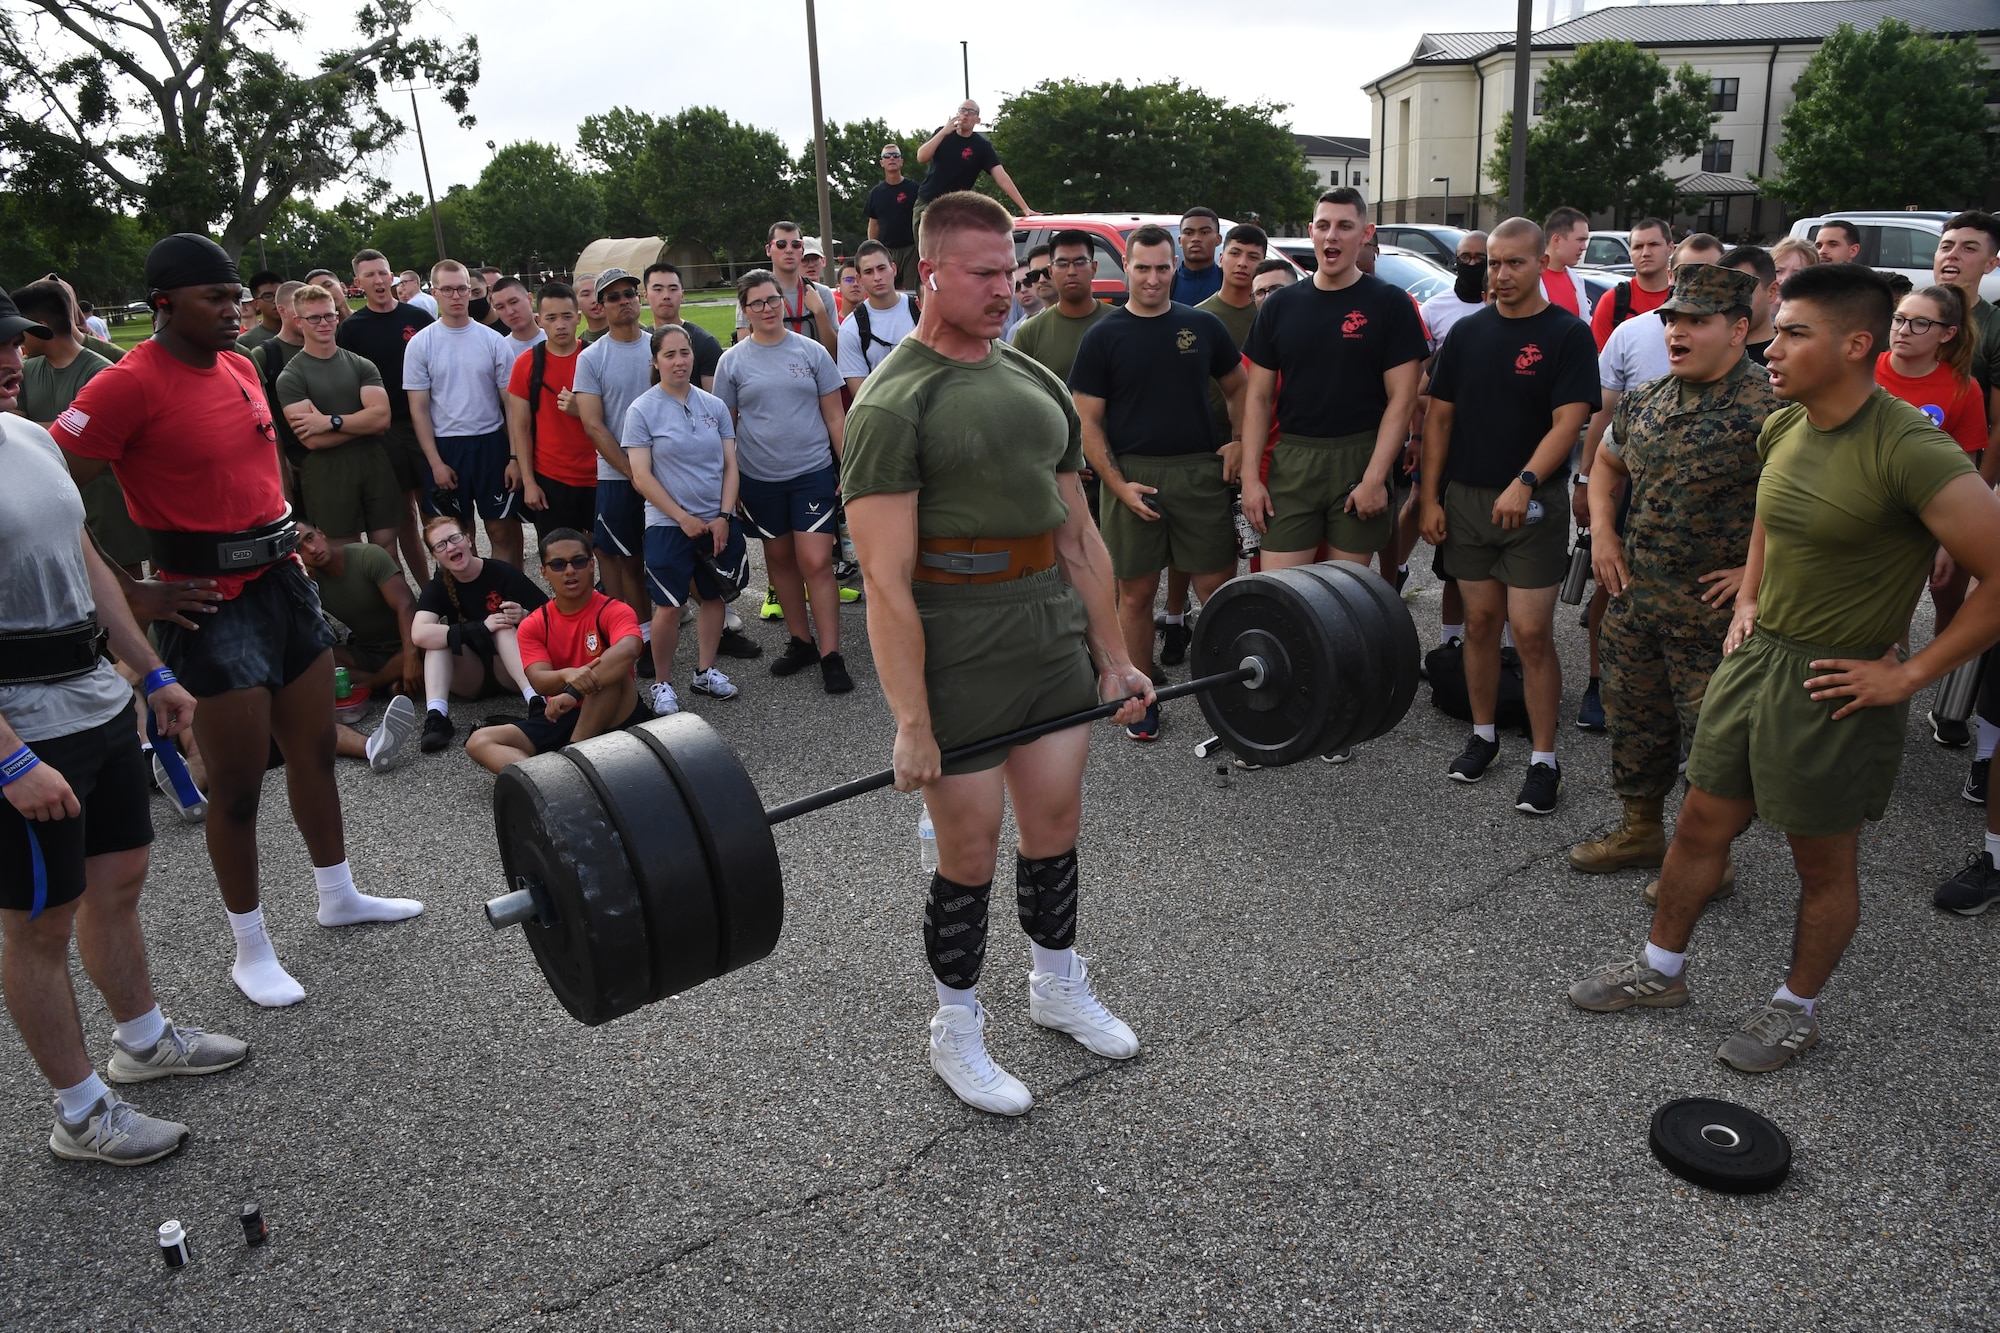 U.S. Marine Lance Corporal Jordan Coon, Keesler Marine Detachment student, participates in dead lift during the 81st Training Group Olympics at Keesler Air Force Base, Mississippi, June 11, 2021. The event also included competitions in long jump, track, shot put and discus. (U.S. Air Force photo by Kemberly Groue)